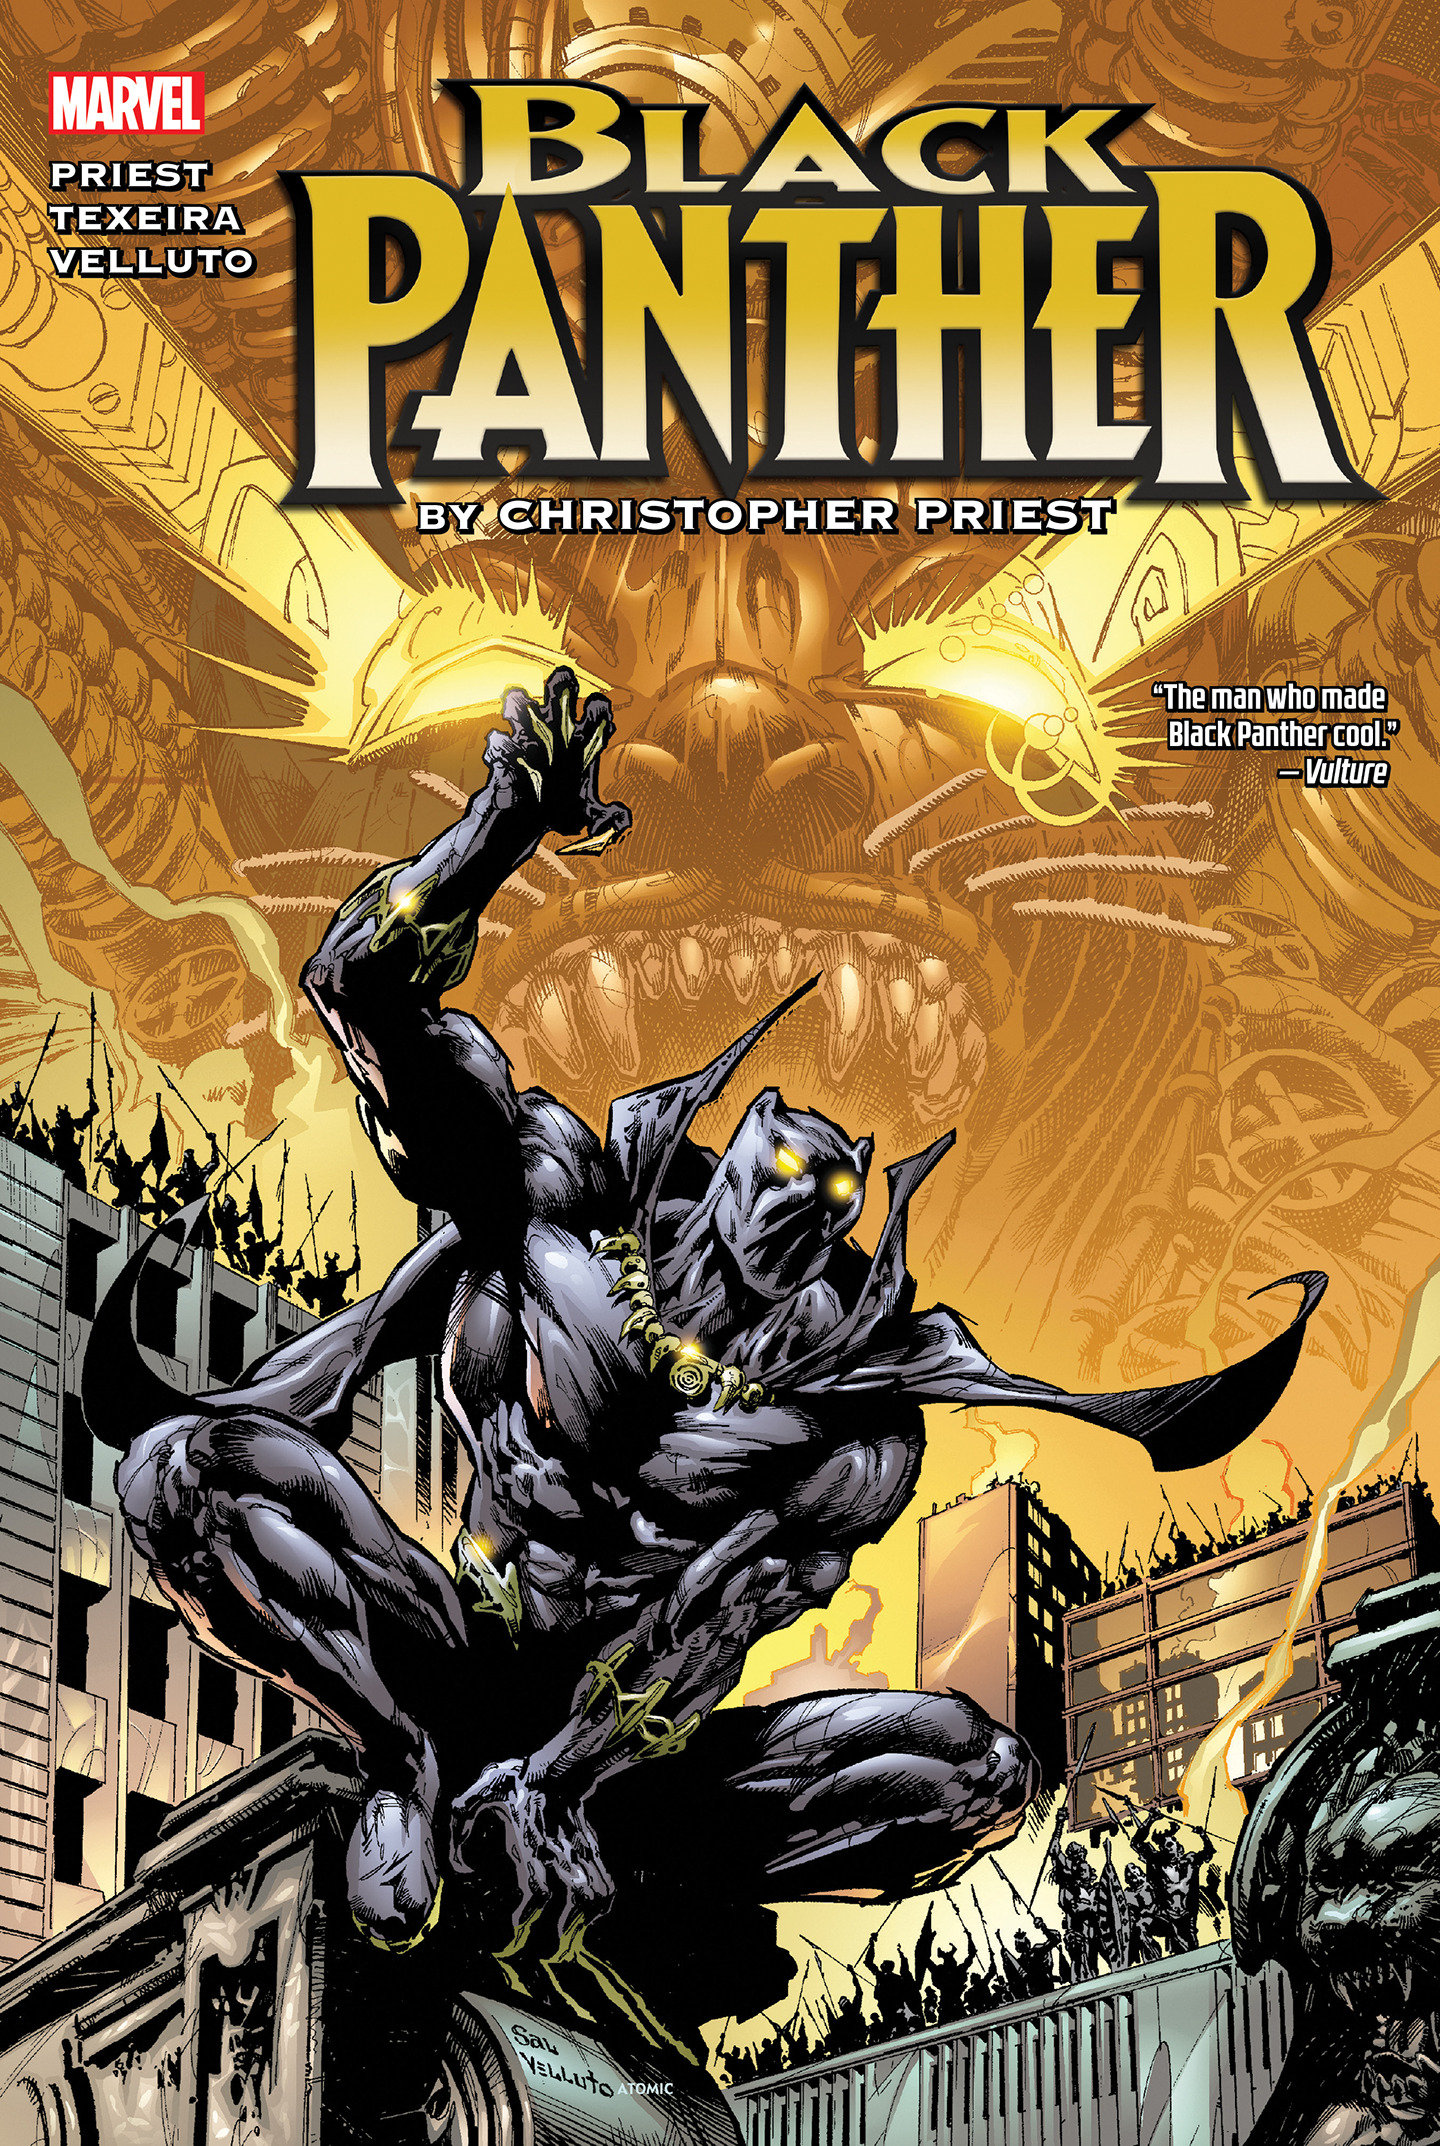 Black Panther by Priest Omnibus Hardcover Volume 1 Velluto Direct Market Edition